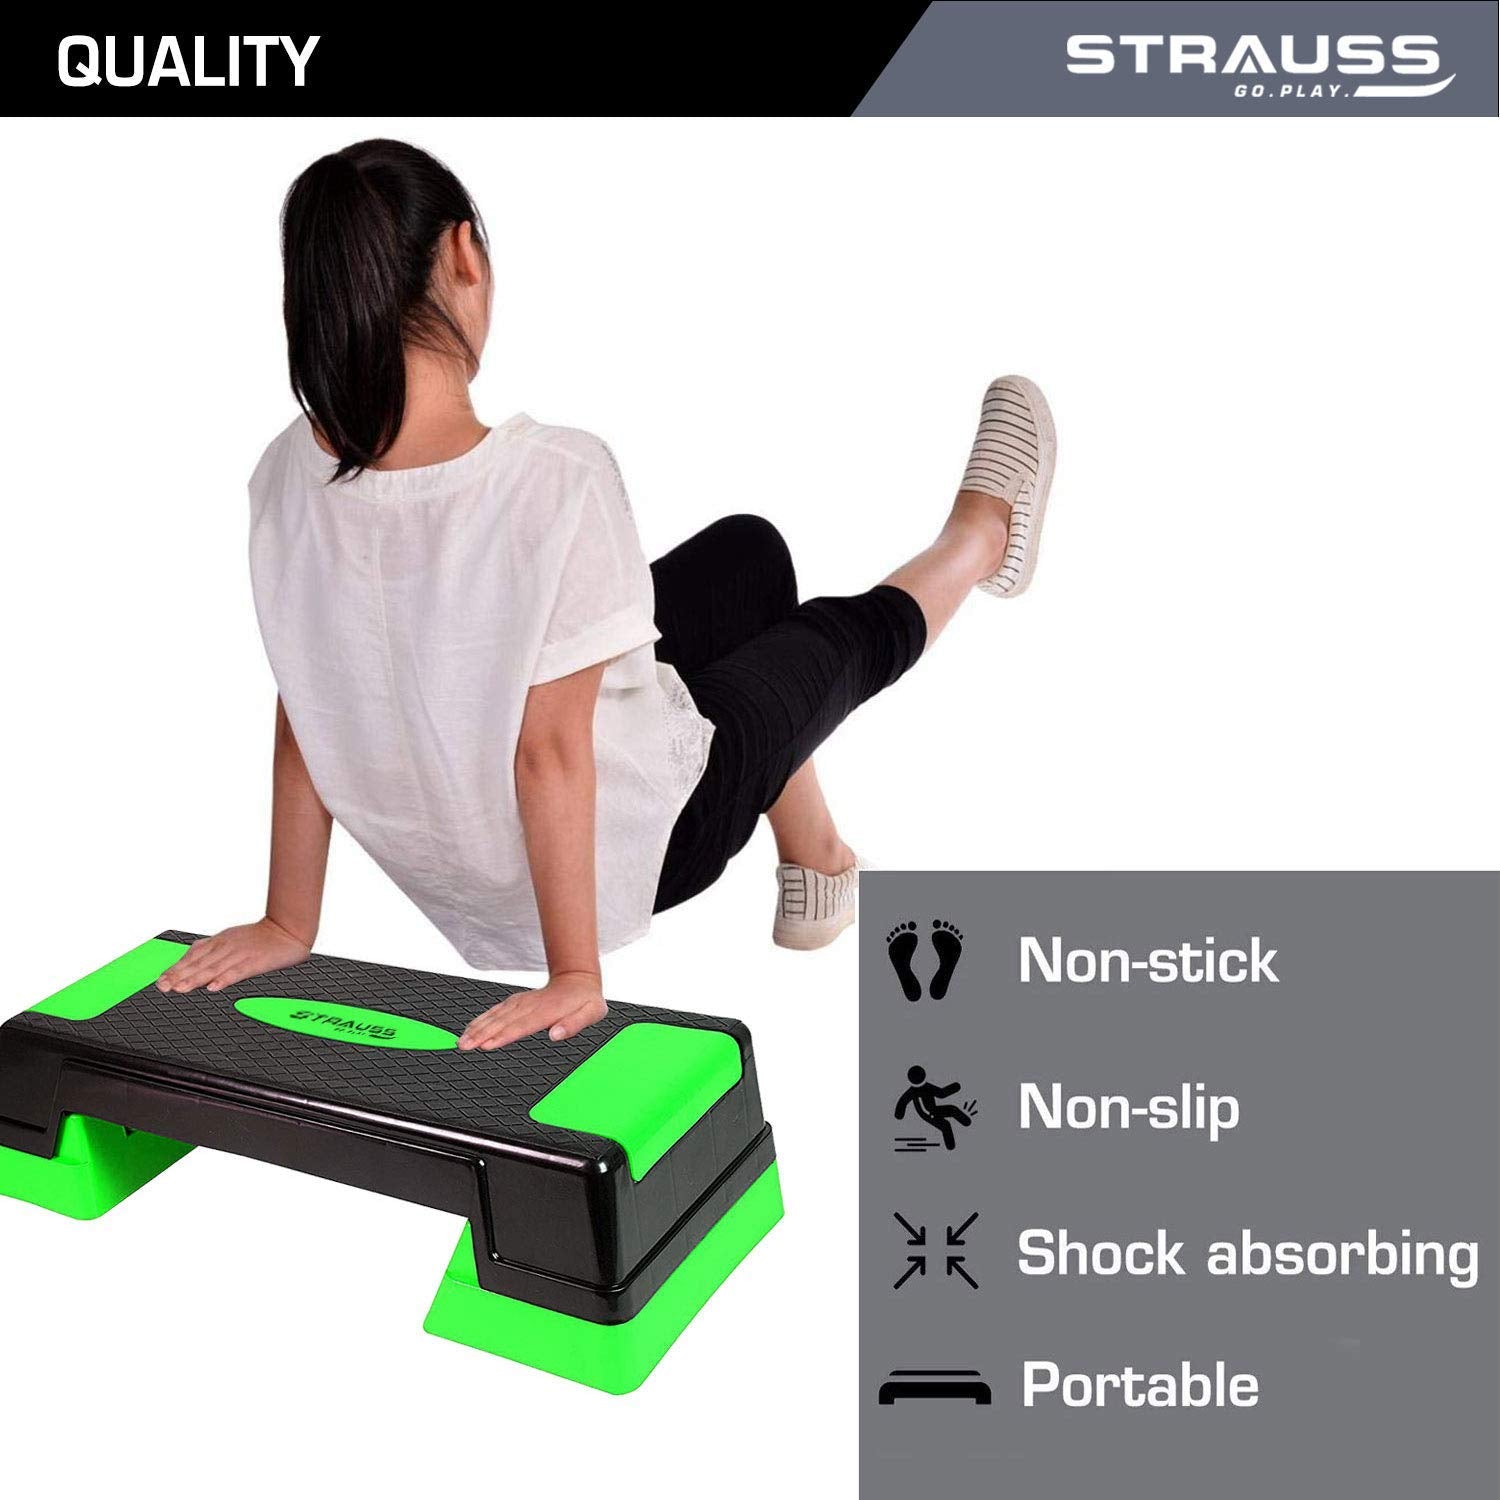 Strauss High Rise Aerobic Stepper | Two Height Level Adjustments - 6 inches and 8 inches | Slip-Resistant & Shock Absorbing Platform for Extra-Durability - Supports Upto 200 KG, (Green)